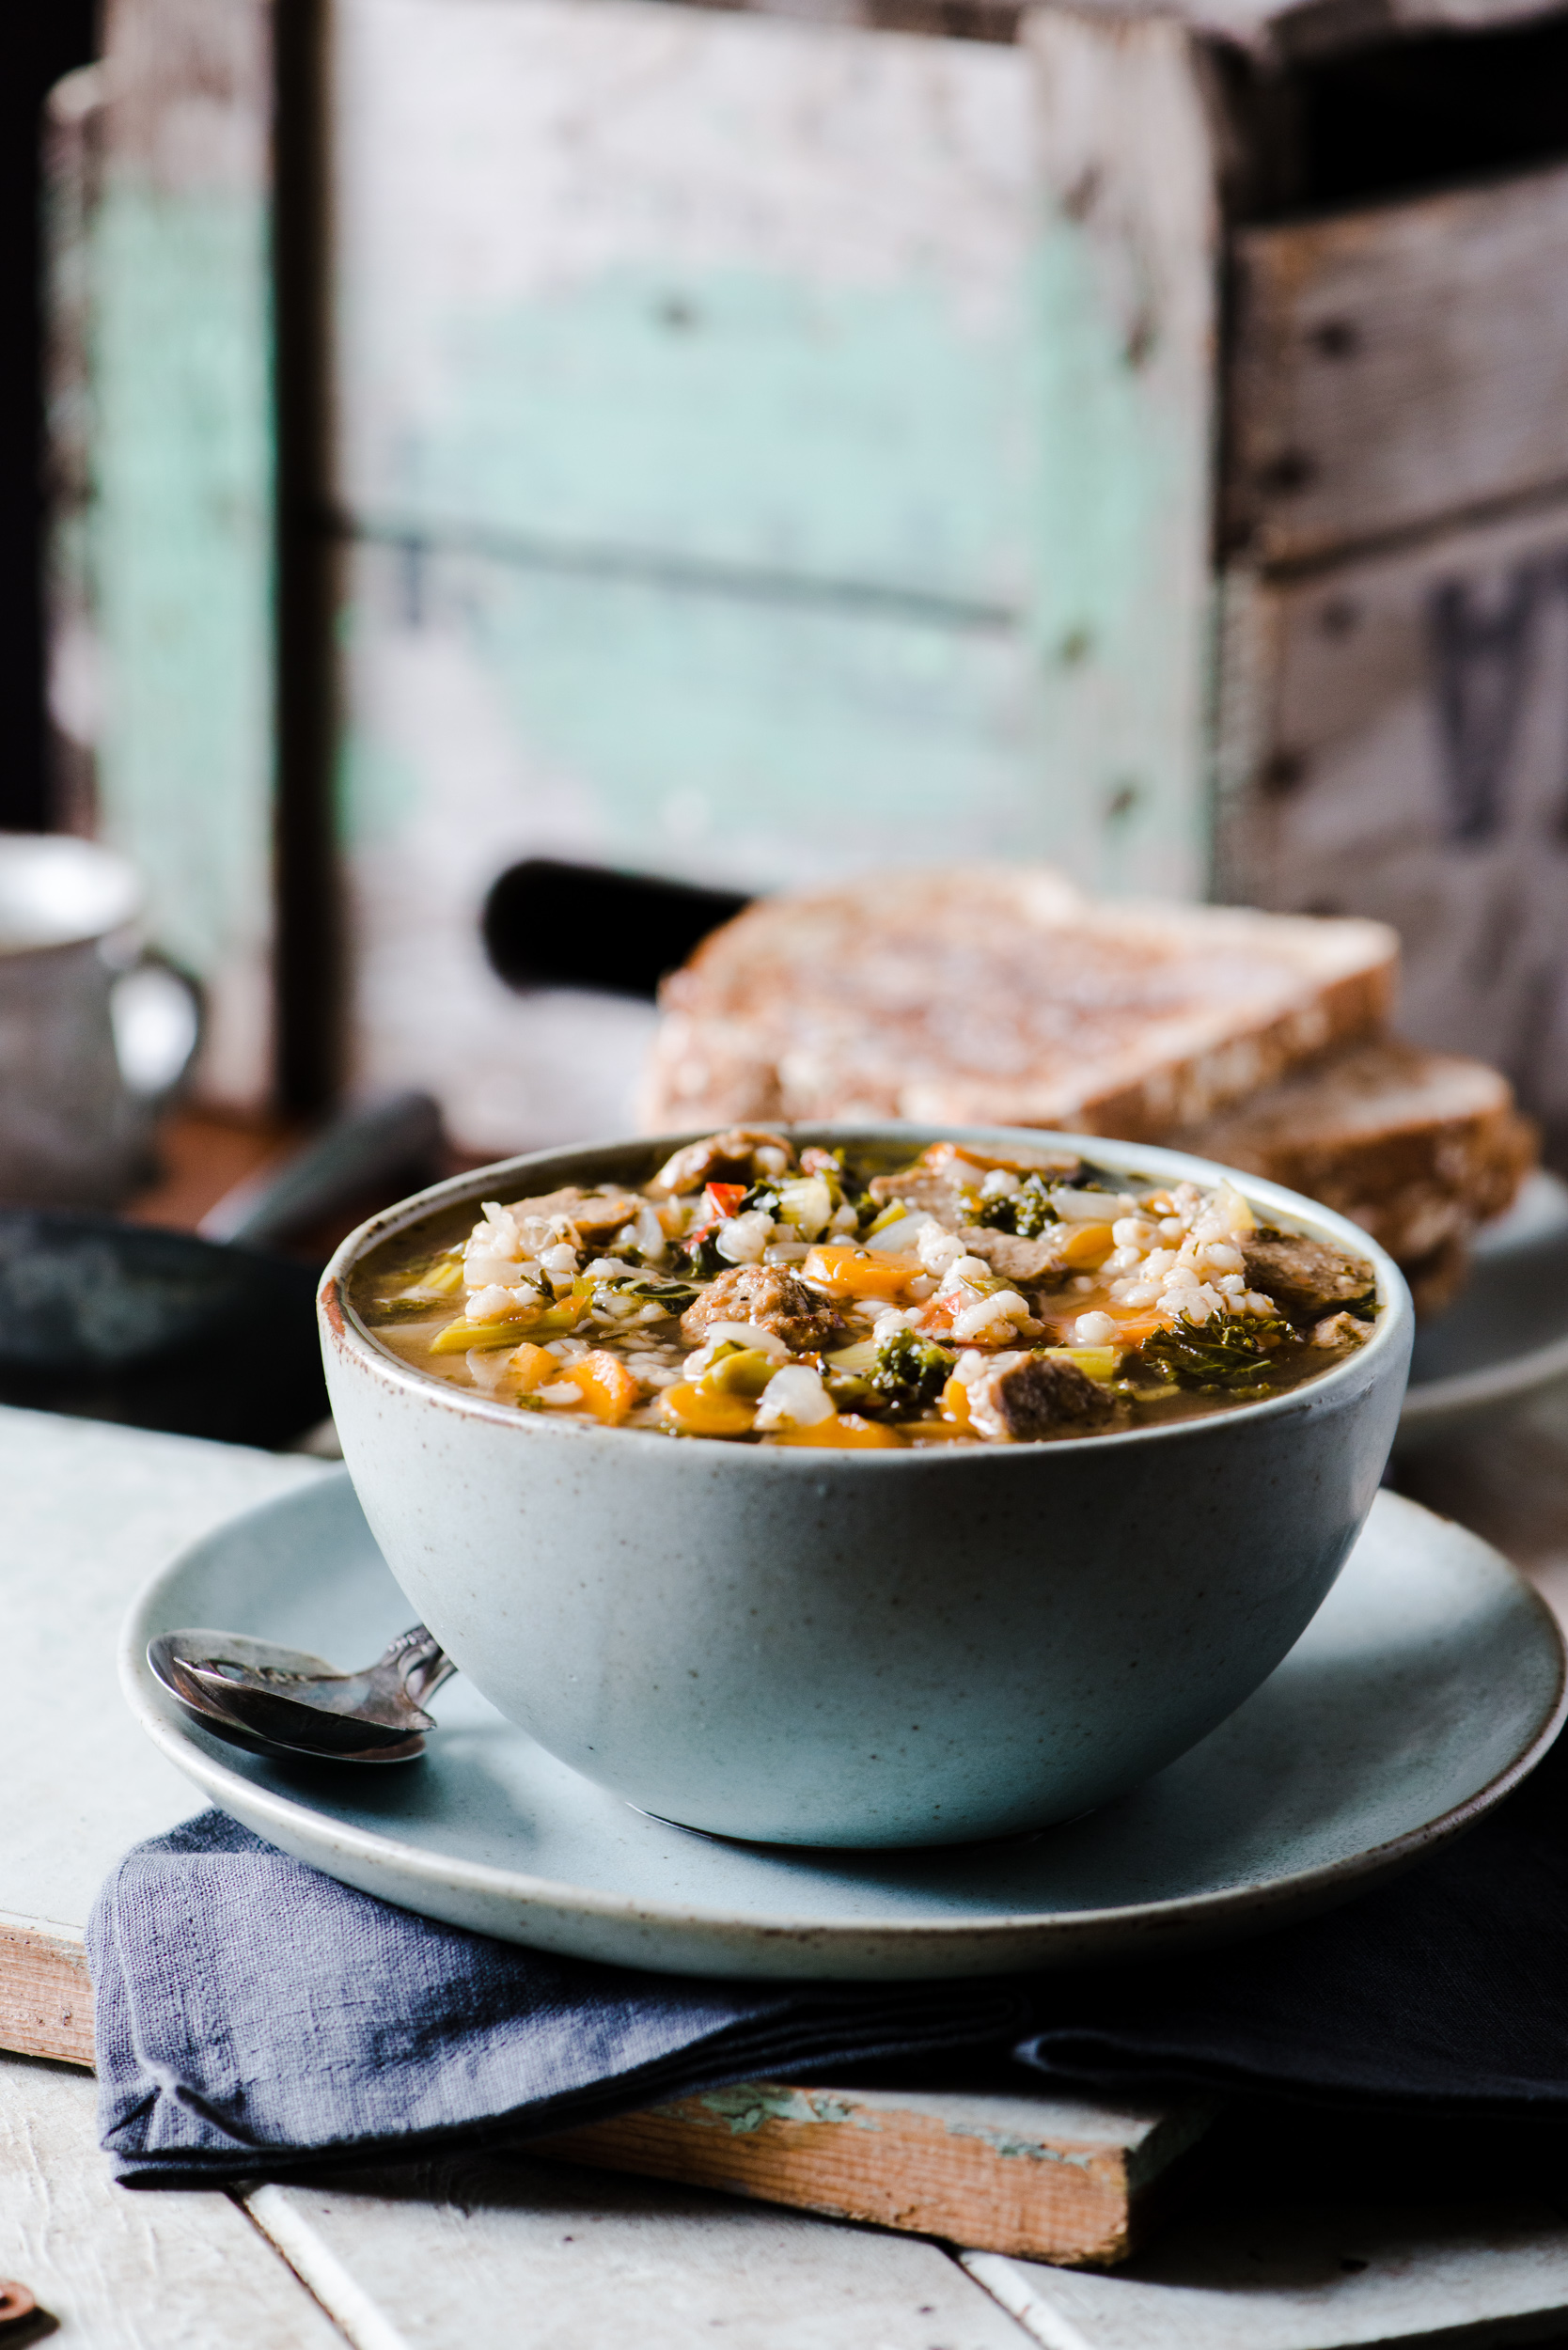 Tuscan Barley Soup - A hearty soup with turkey sausage, veggies, barley and more.